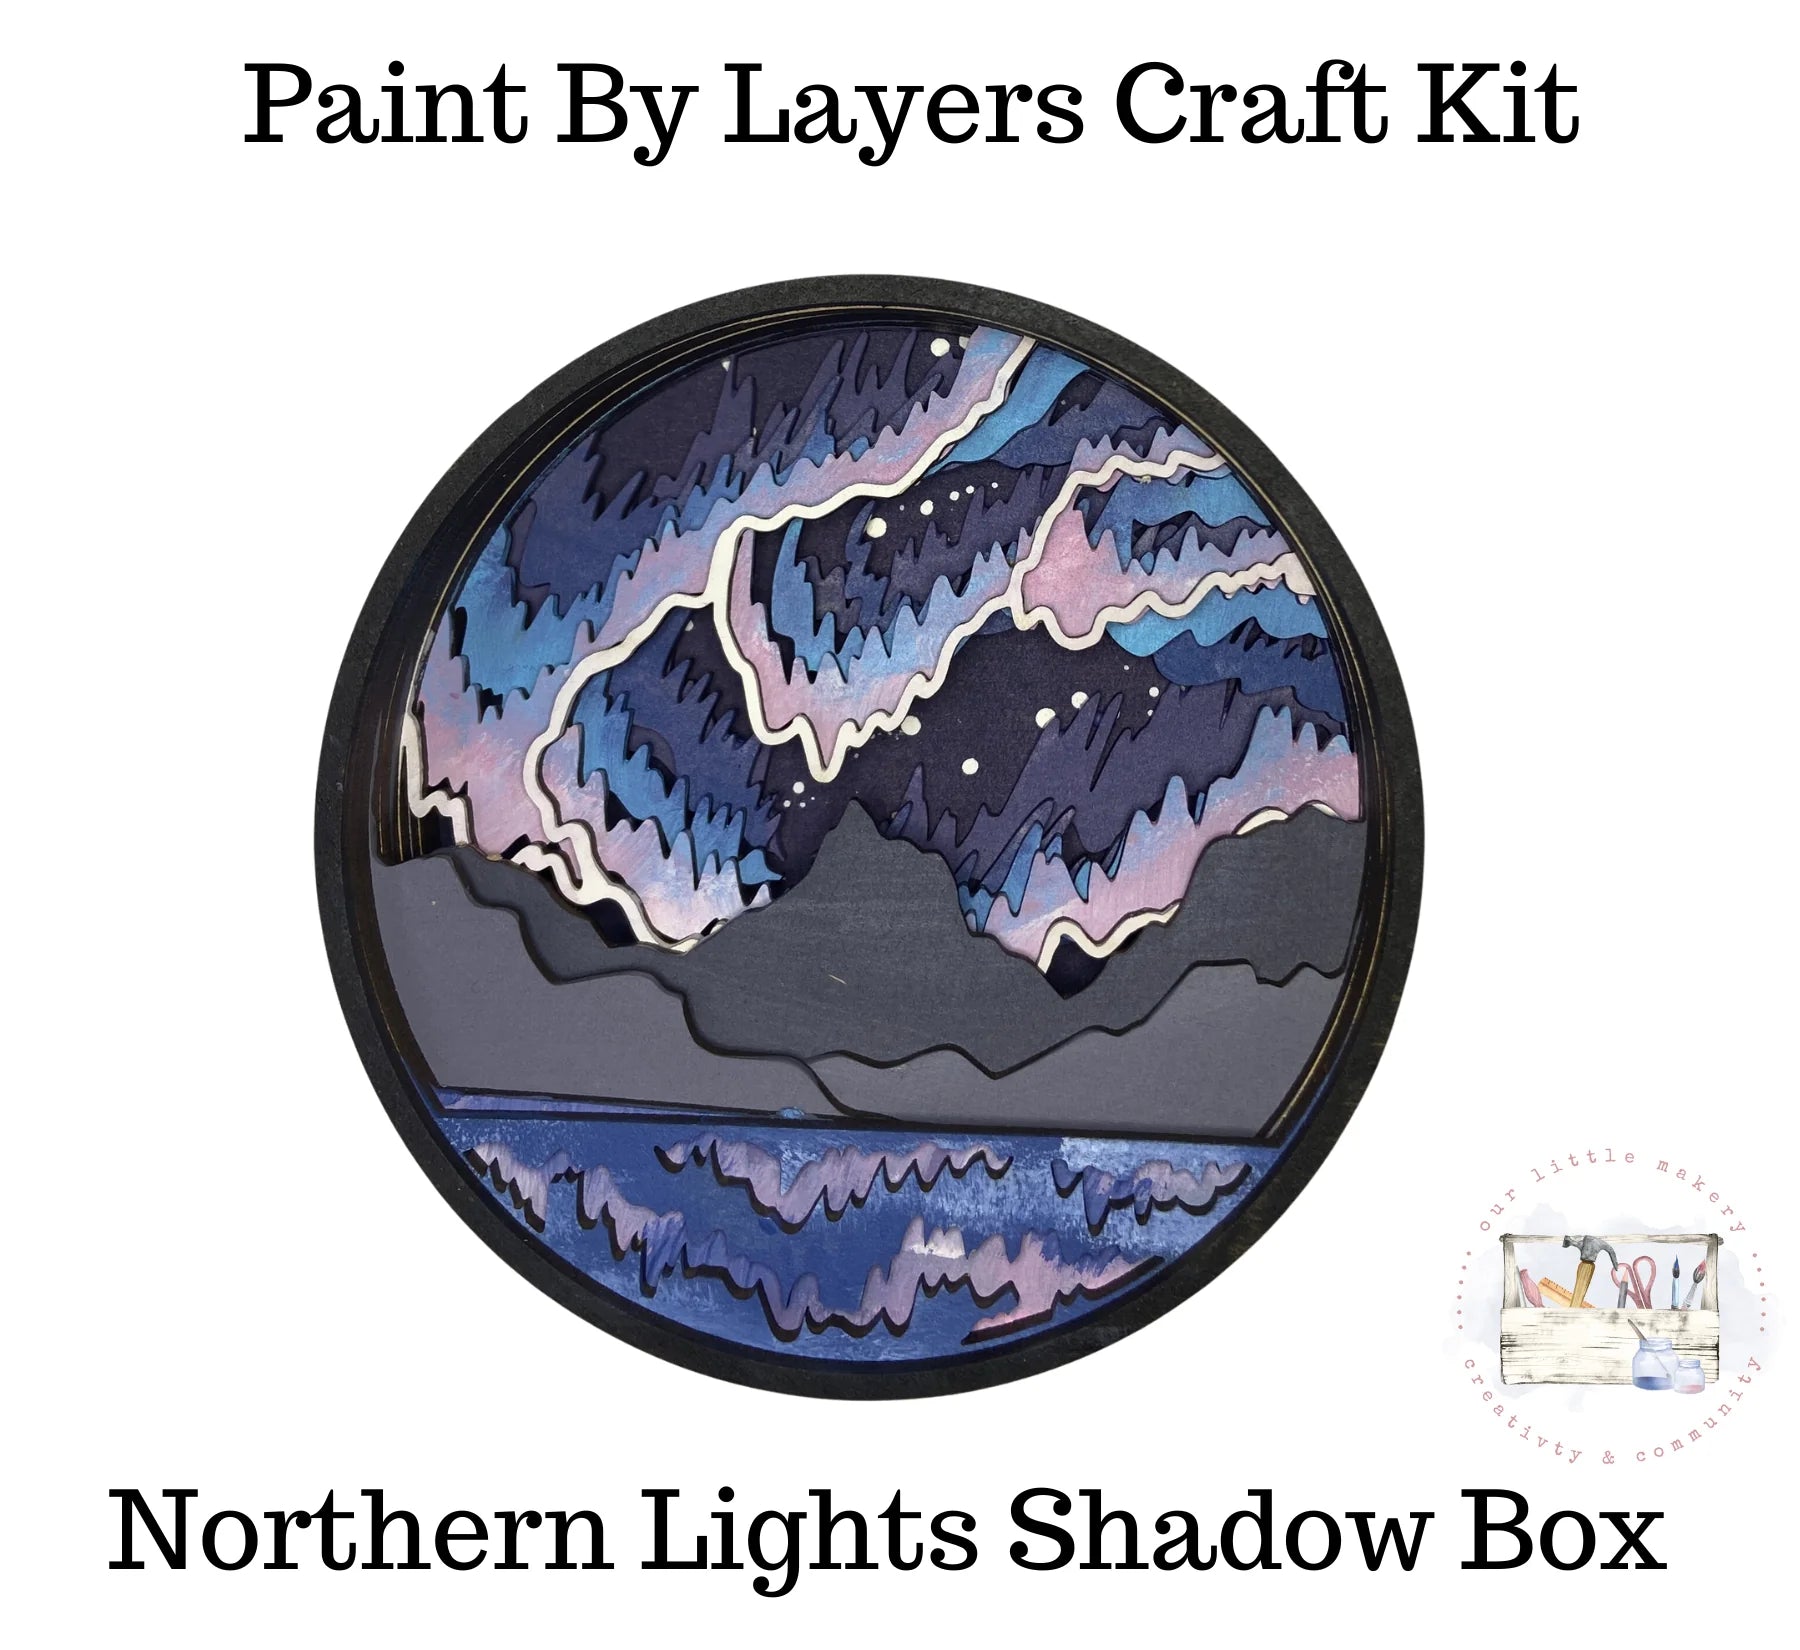 Paint by layers craft kits